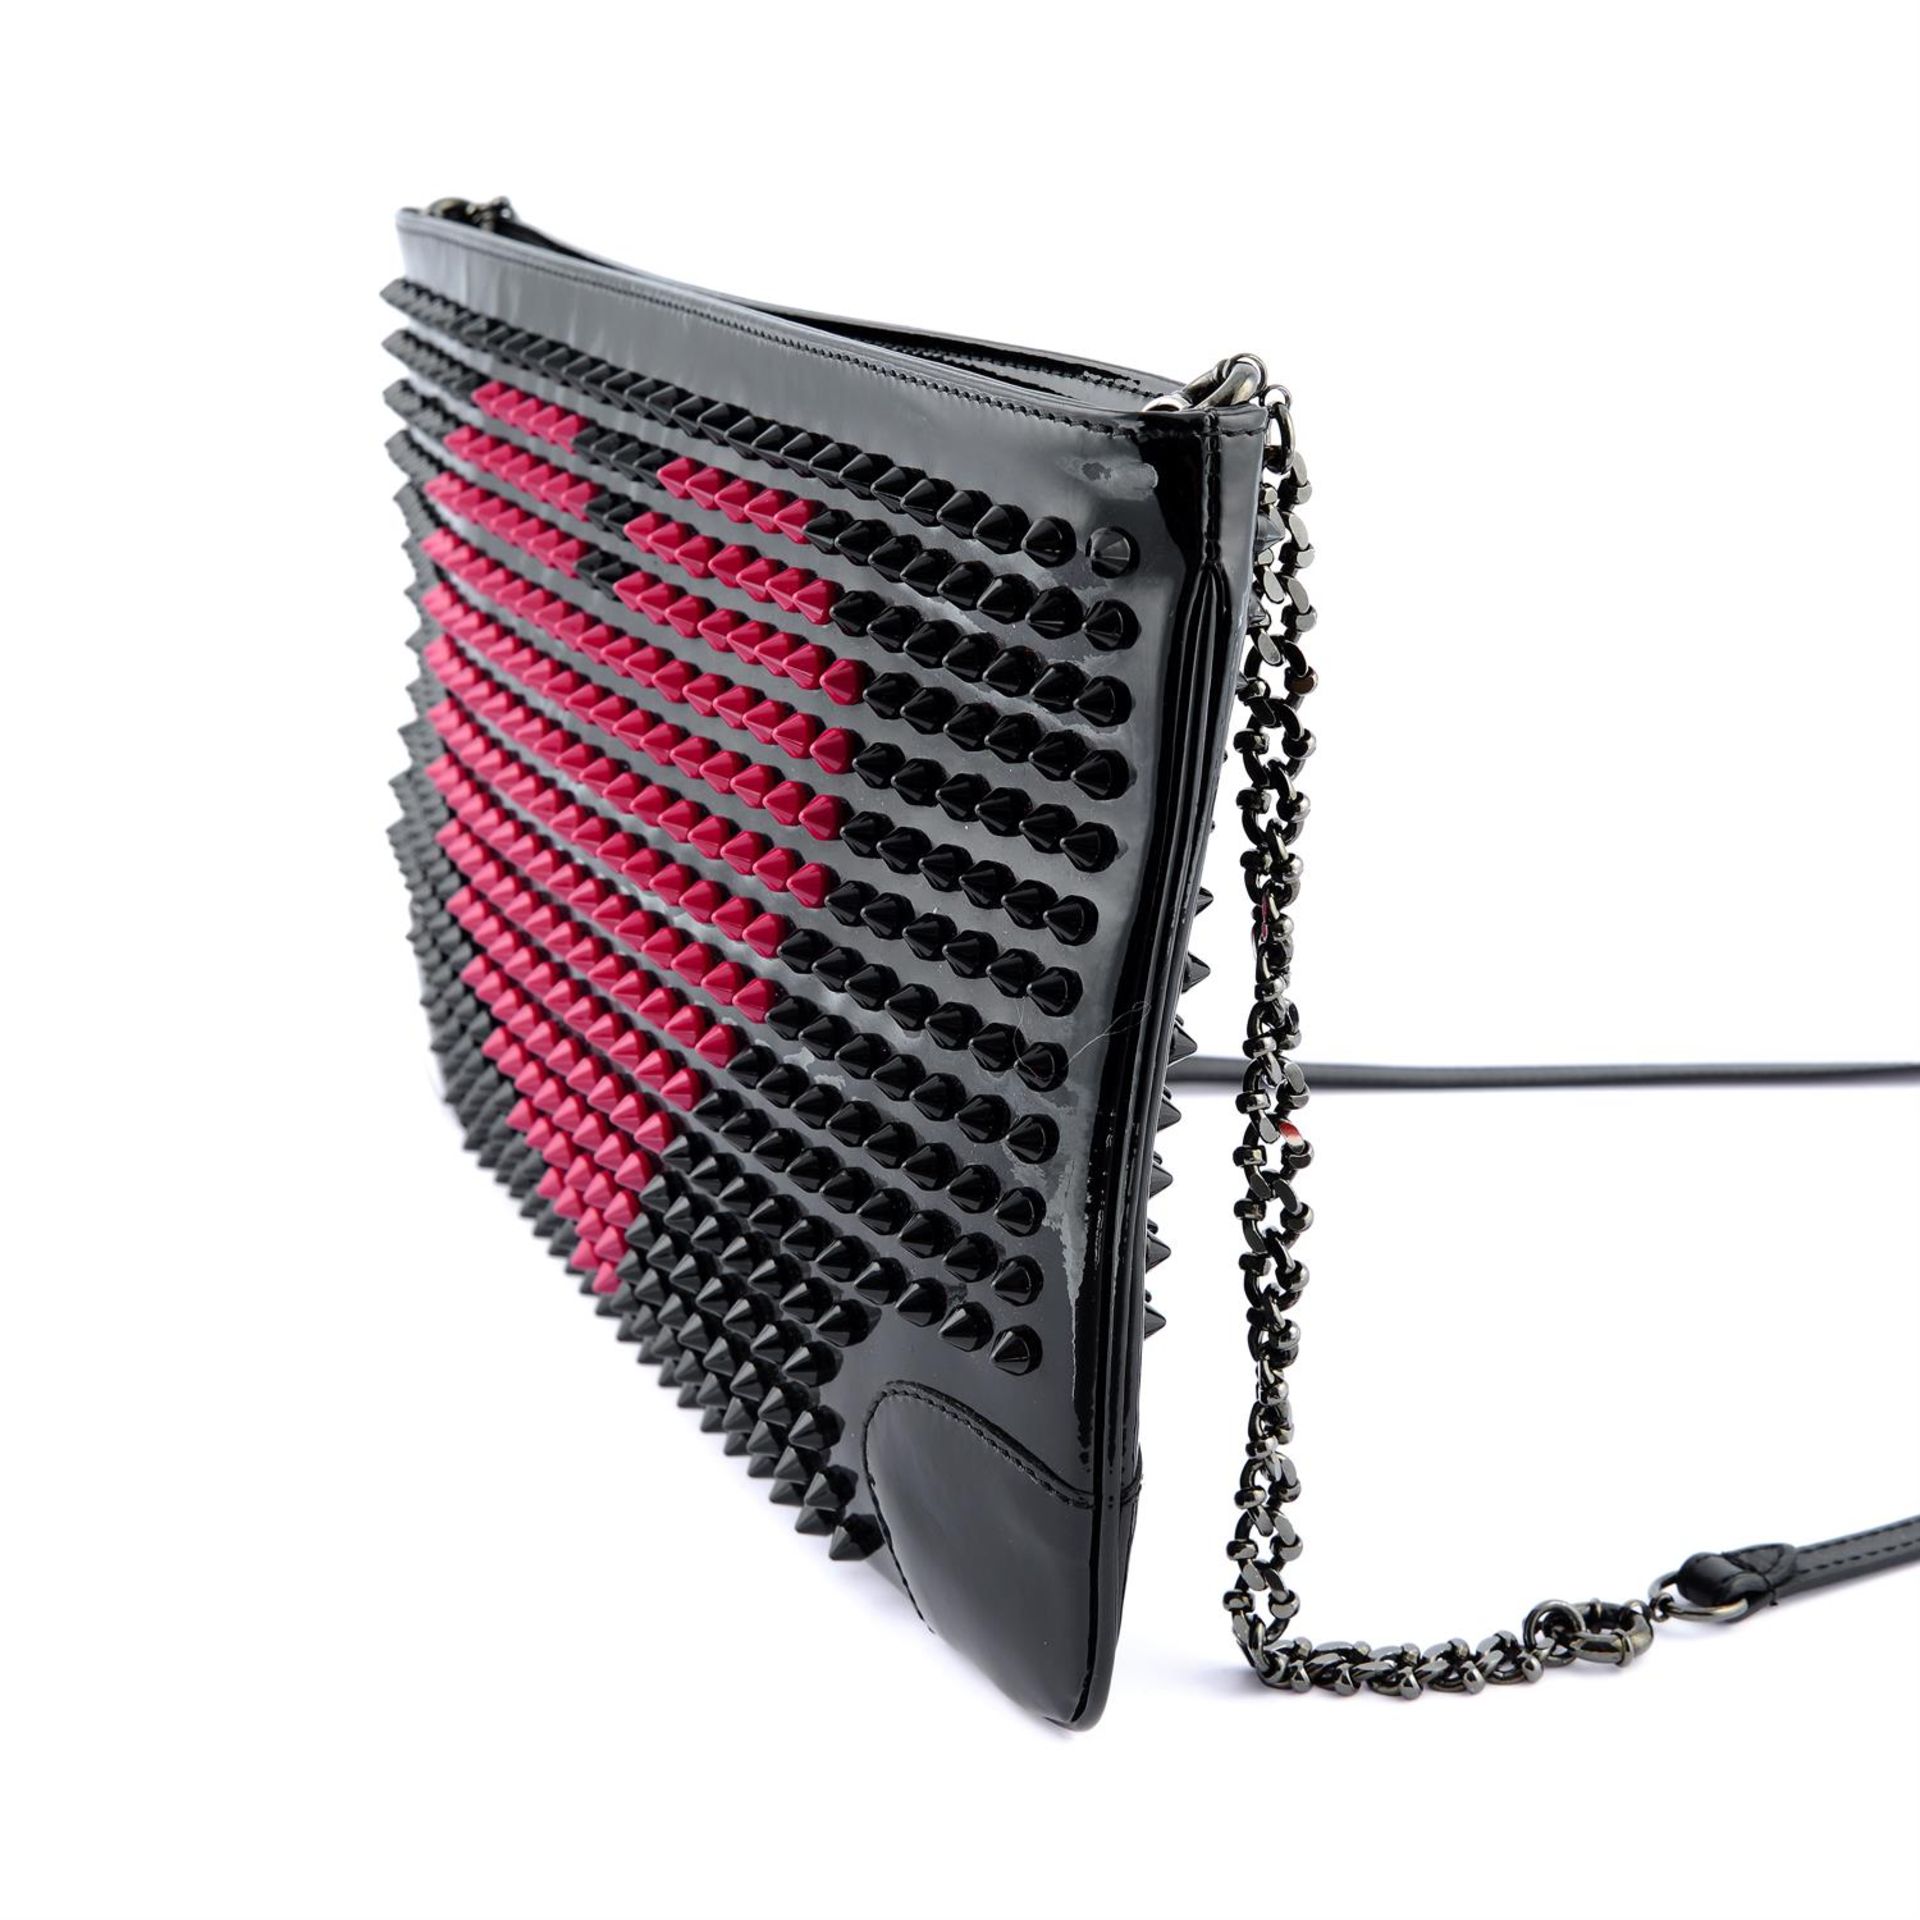 CHRISTIAN LOUBOUTIN - a black patent leather spiked Loubiposh Valentines clutch bag. - Image 3 of 4